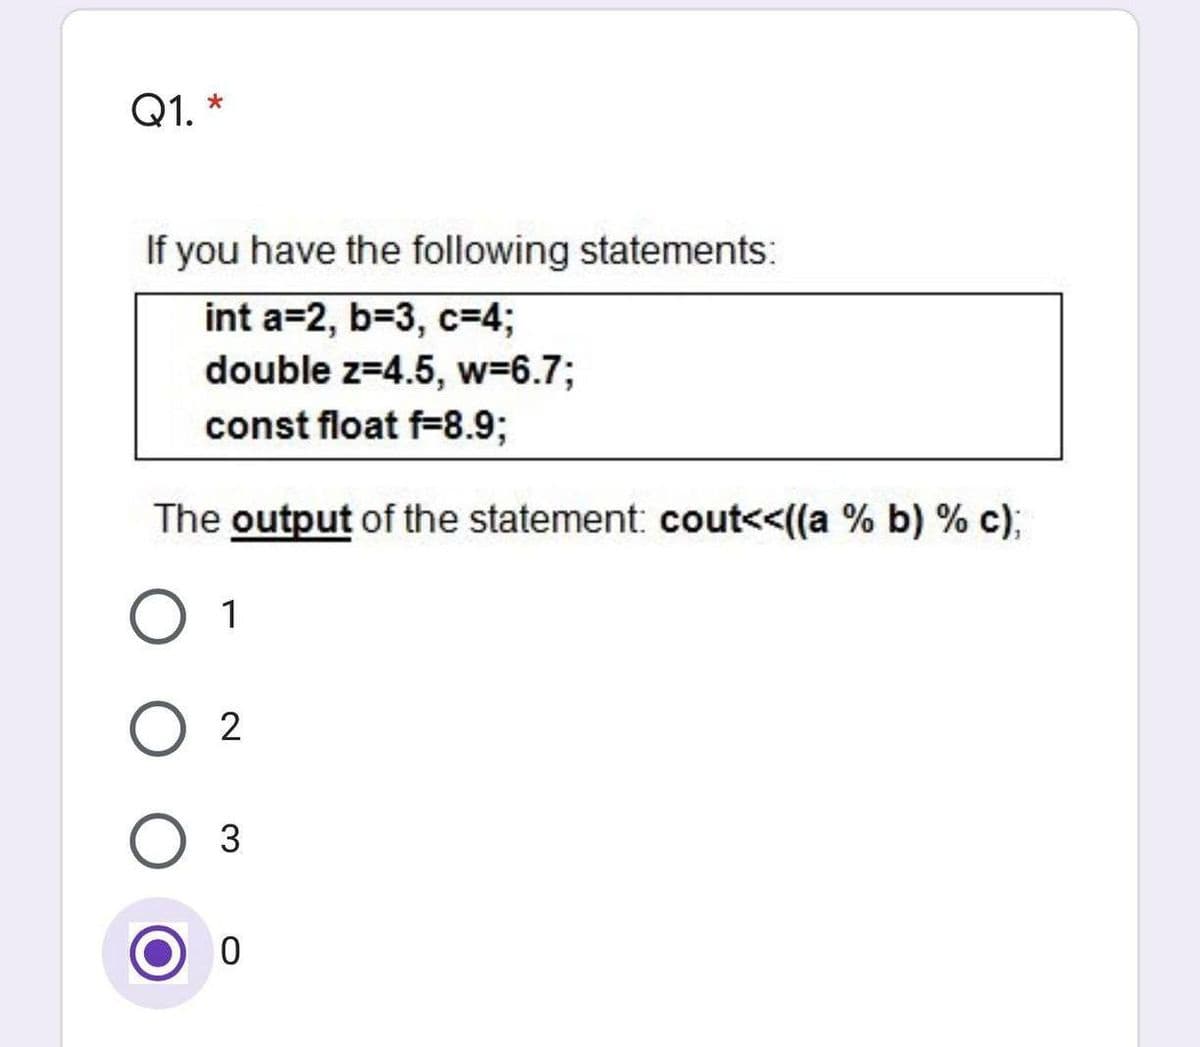 Q1. *
If you have the following statements:
int a=2, b=3, c=4;
double z=4.5, w=6.73;
const float f=8.9;
The output of the statement: cout<<((a % b) % c);
1
O 2
Оз
